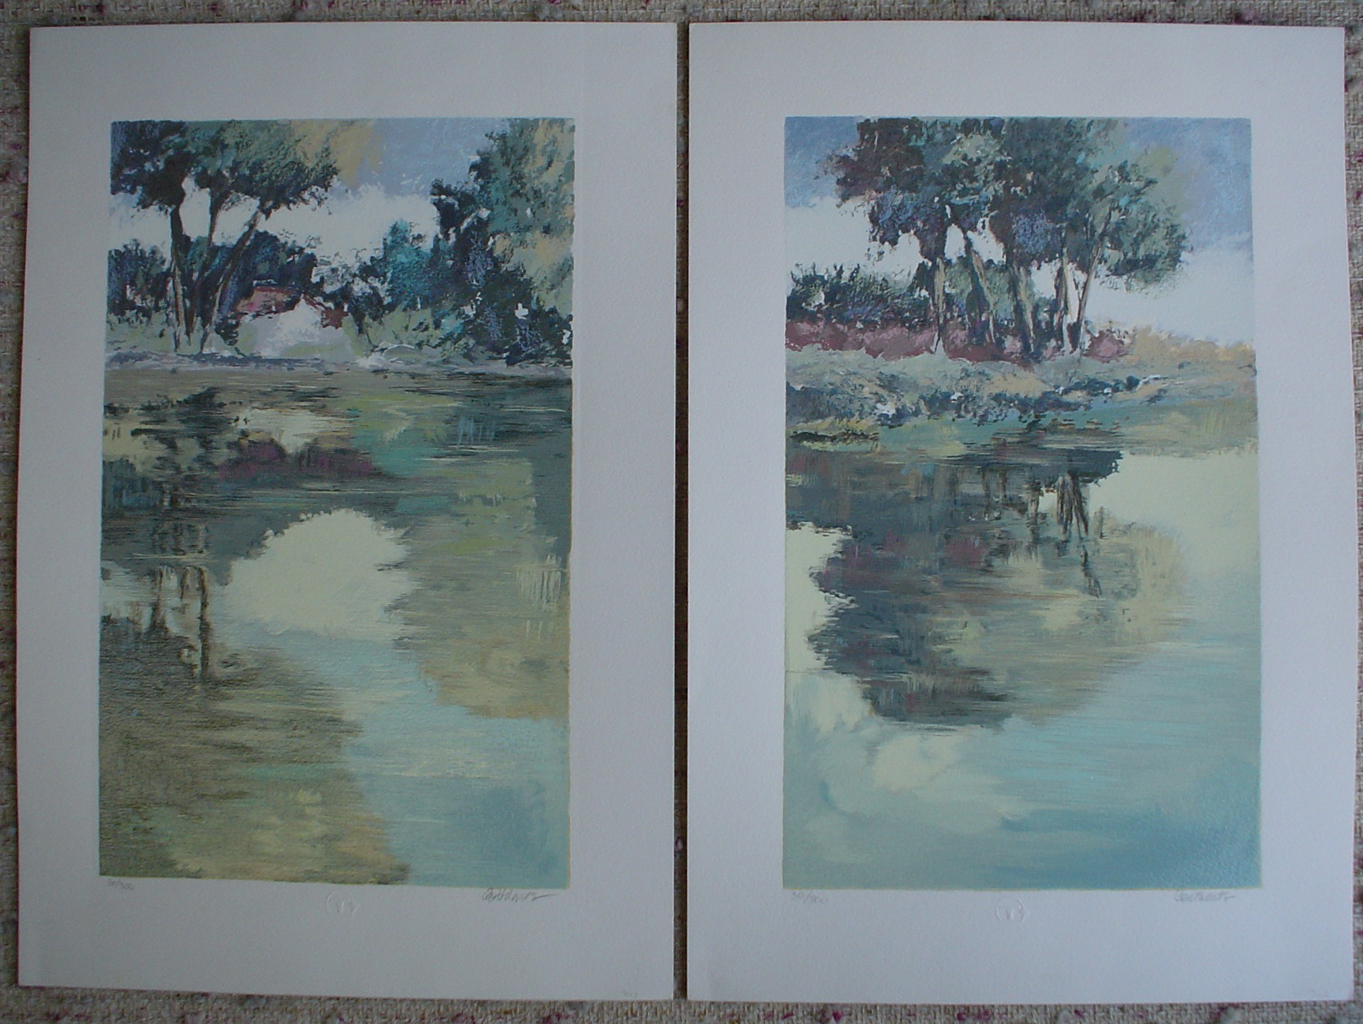 Serenity 4 and Serenity 3 by Corthaus, group of 2 original silkscreens, signed and numbered edition of 300